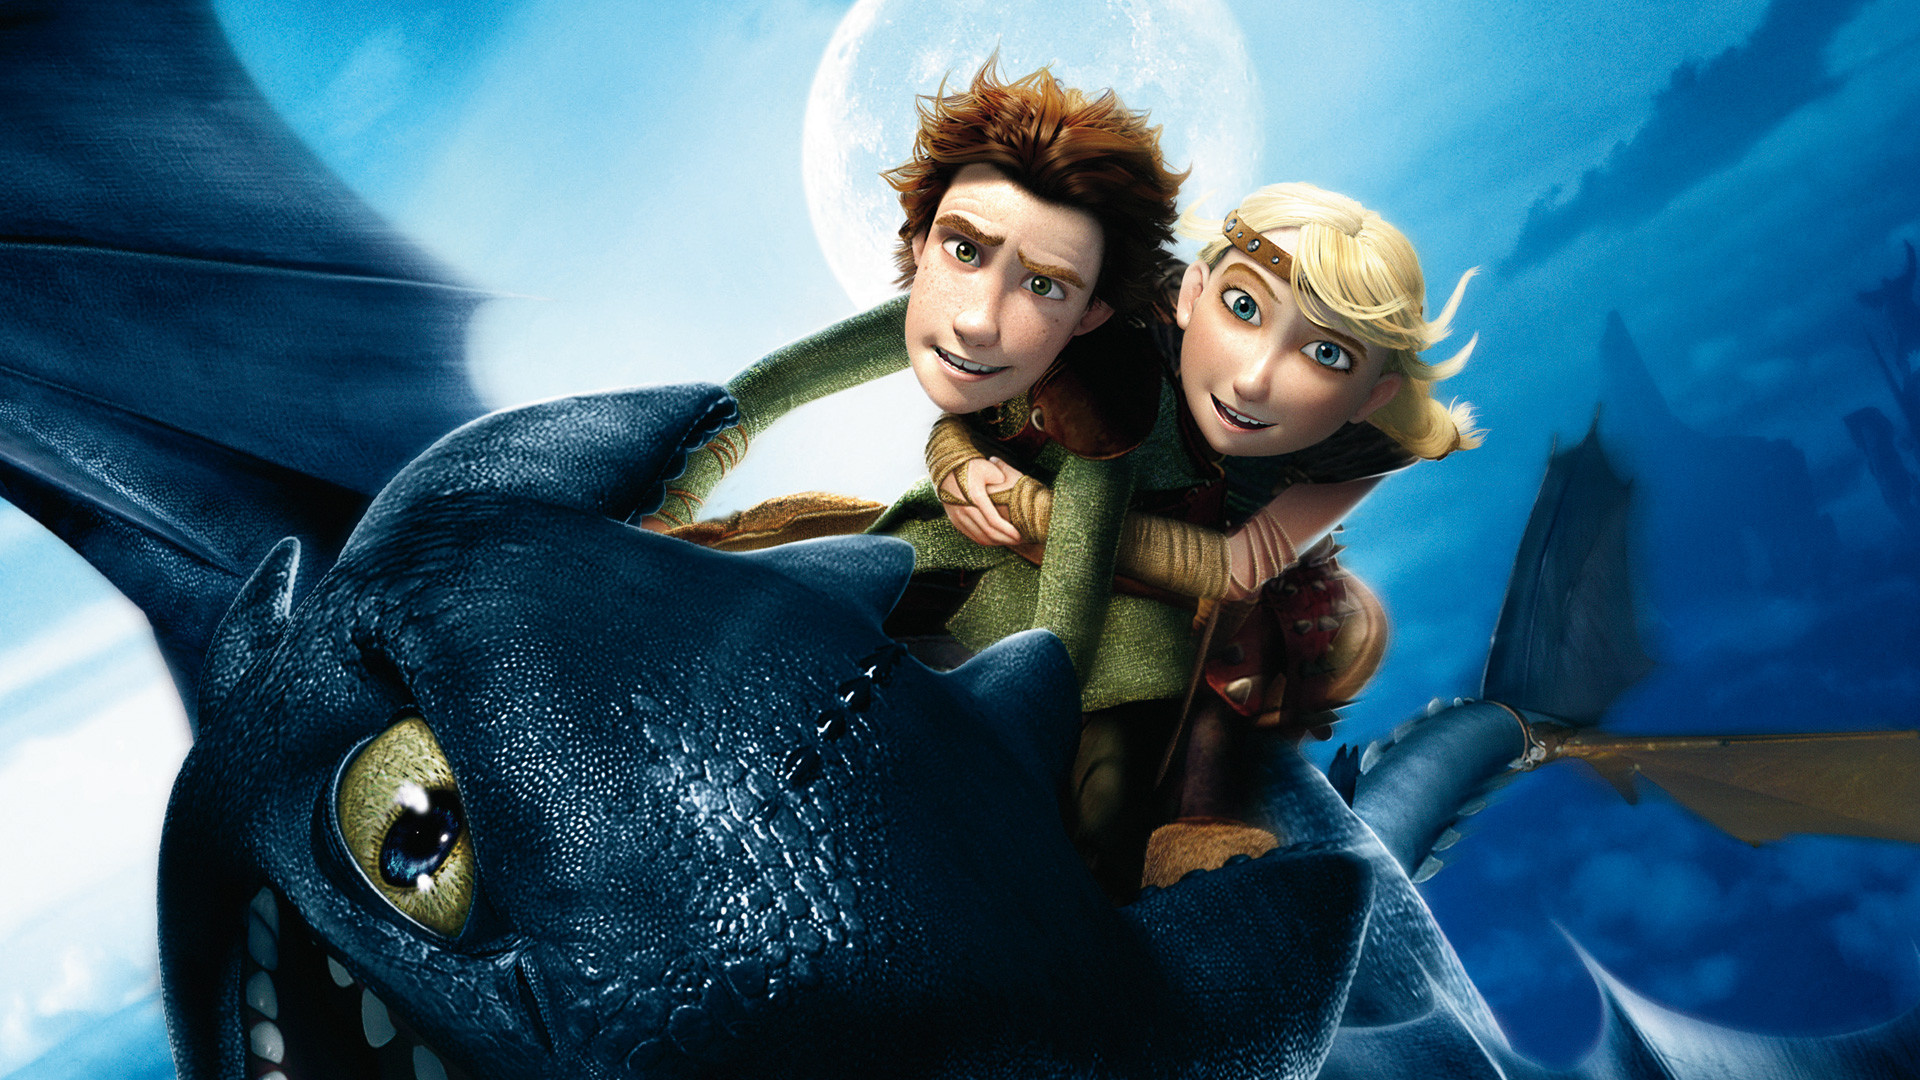 How To Train Your Dragon Movie Review